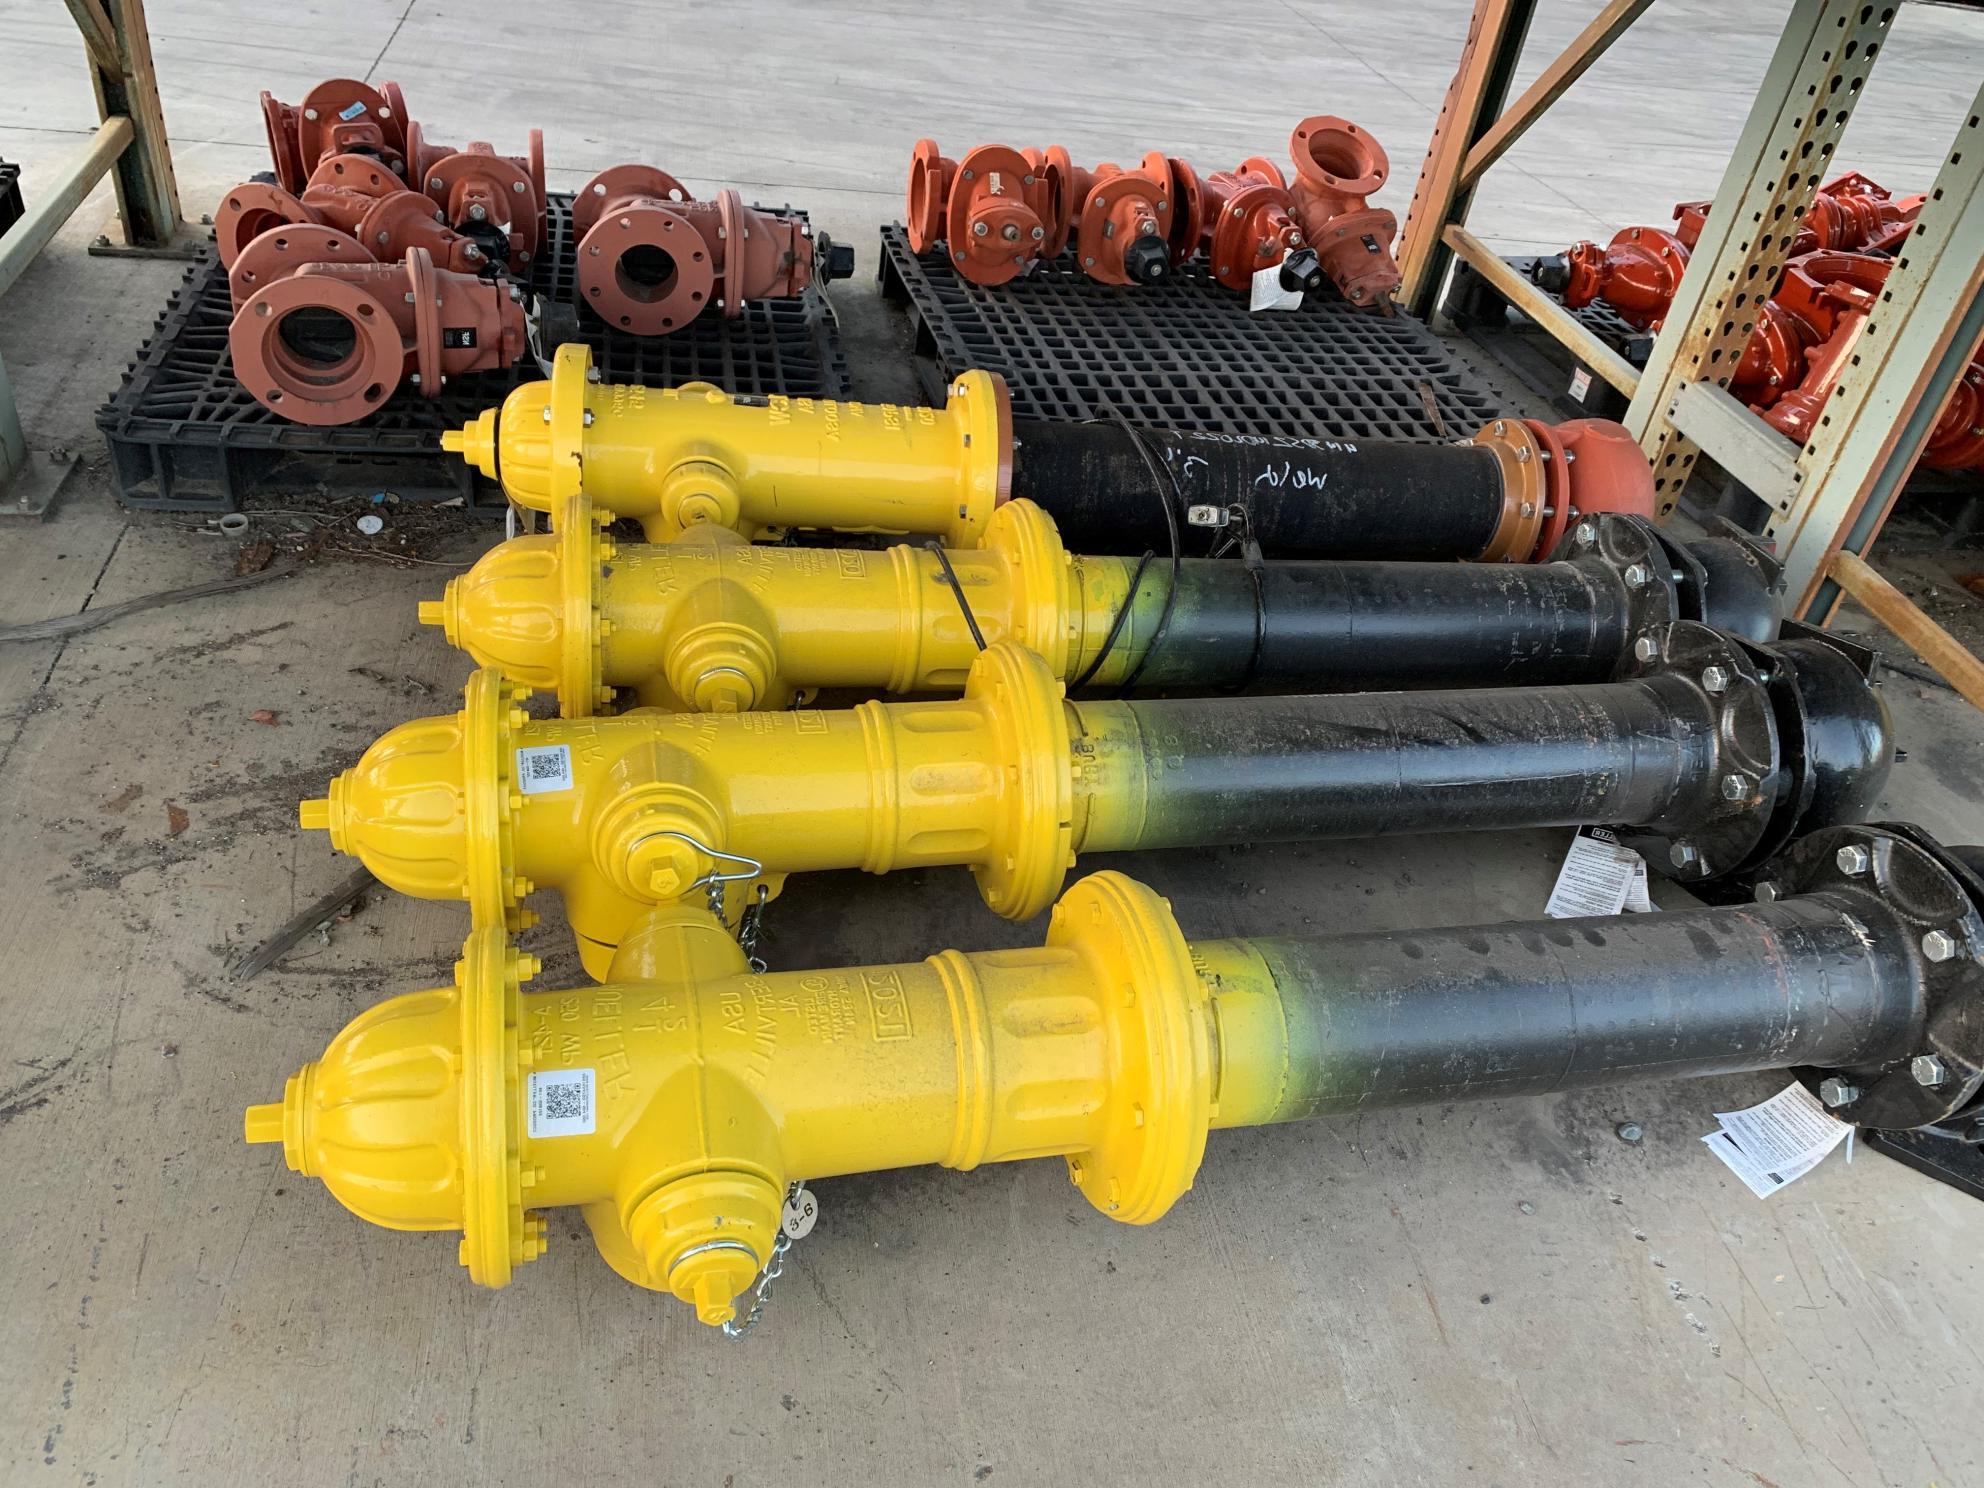 Four hydrants at Stores